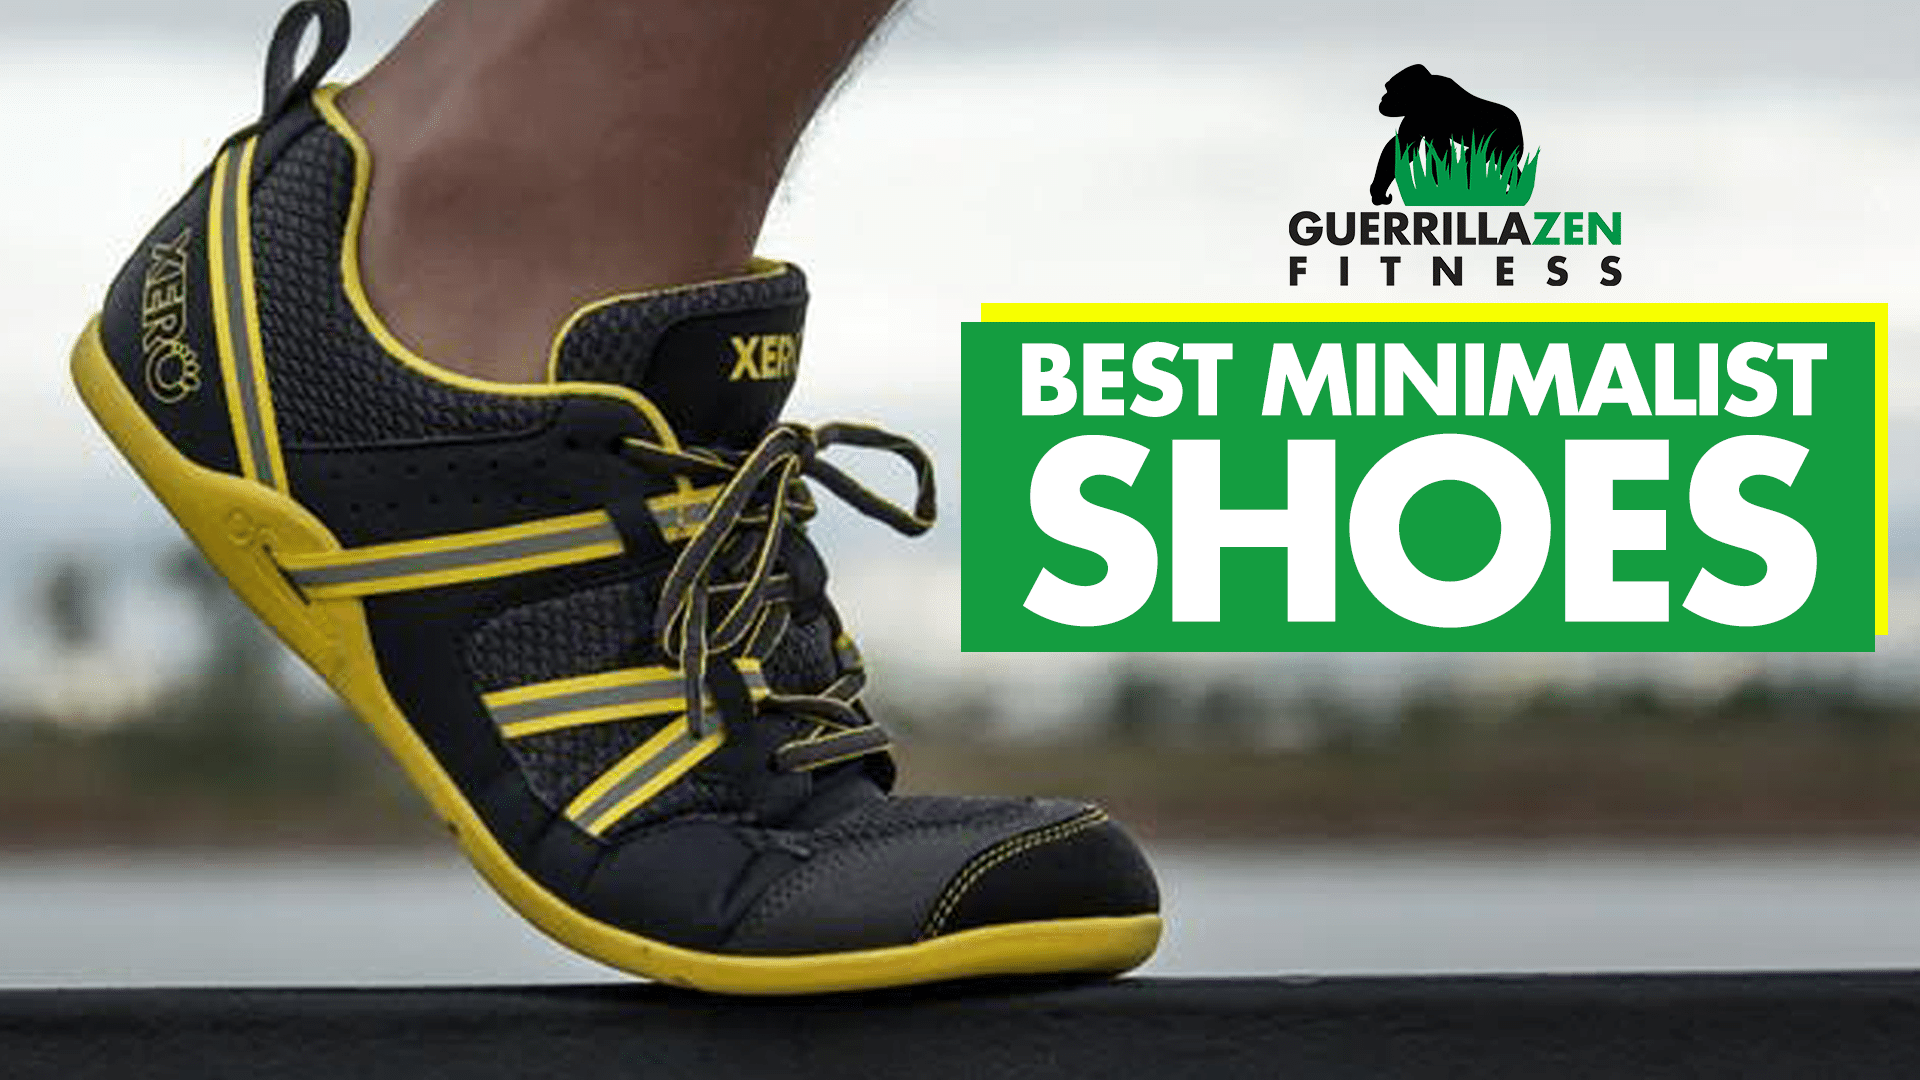 The BEST Minimalist Shoes Foot Health & Functional Fitness